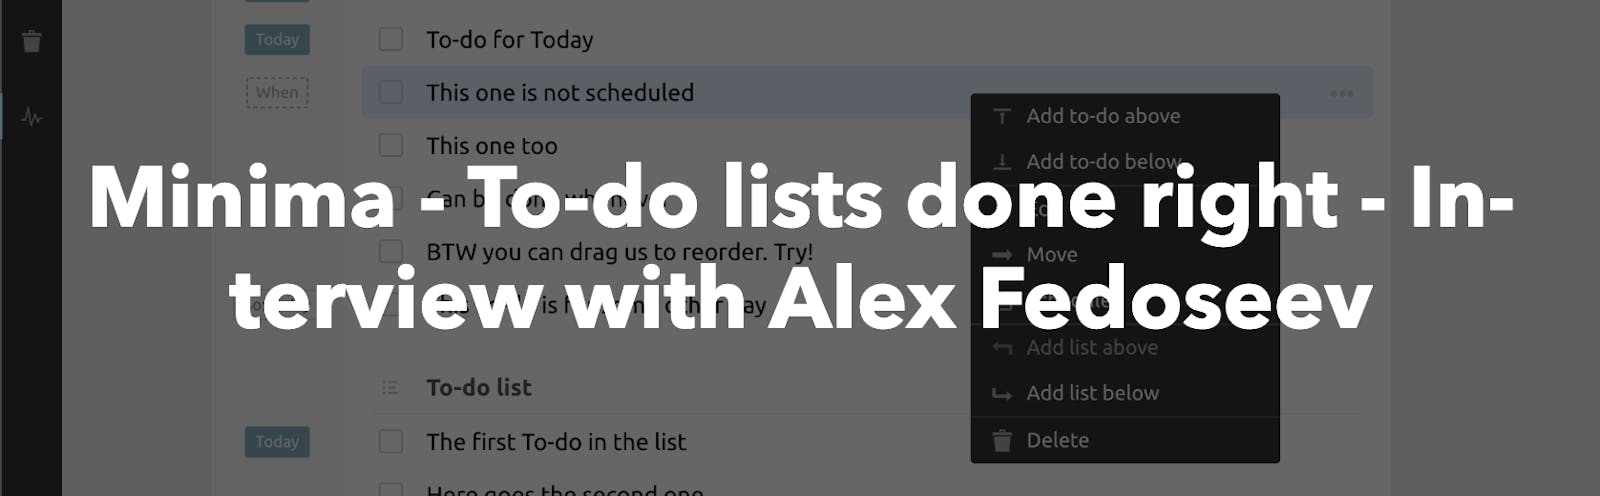 Interview with Alex Fedoseev - Minima - To-do lists done right